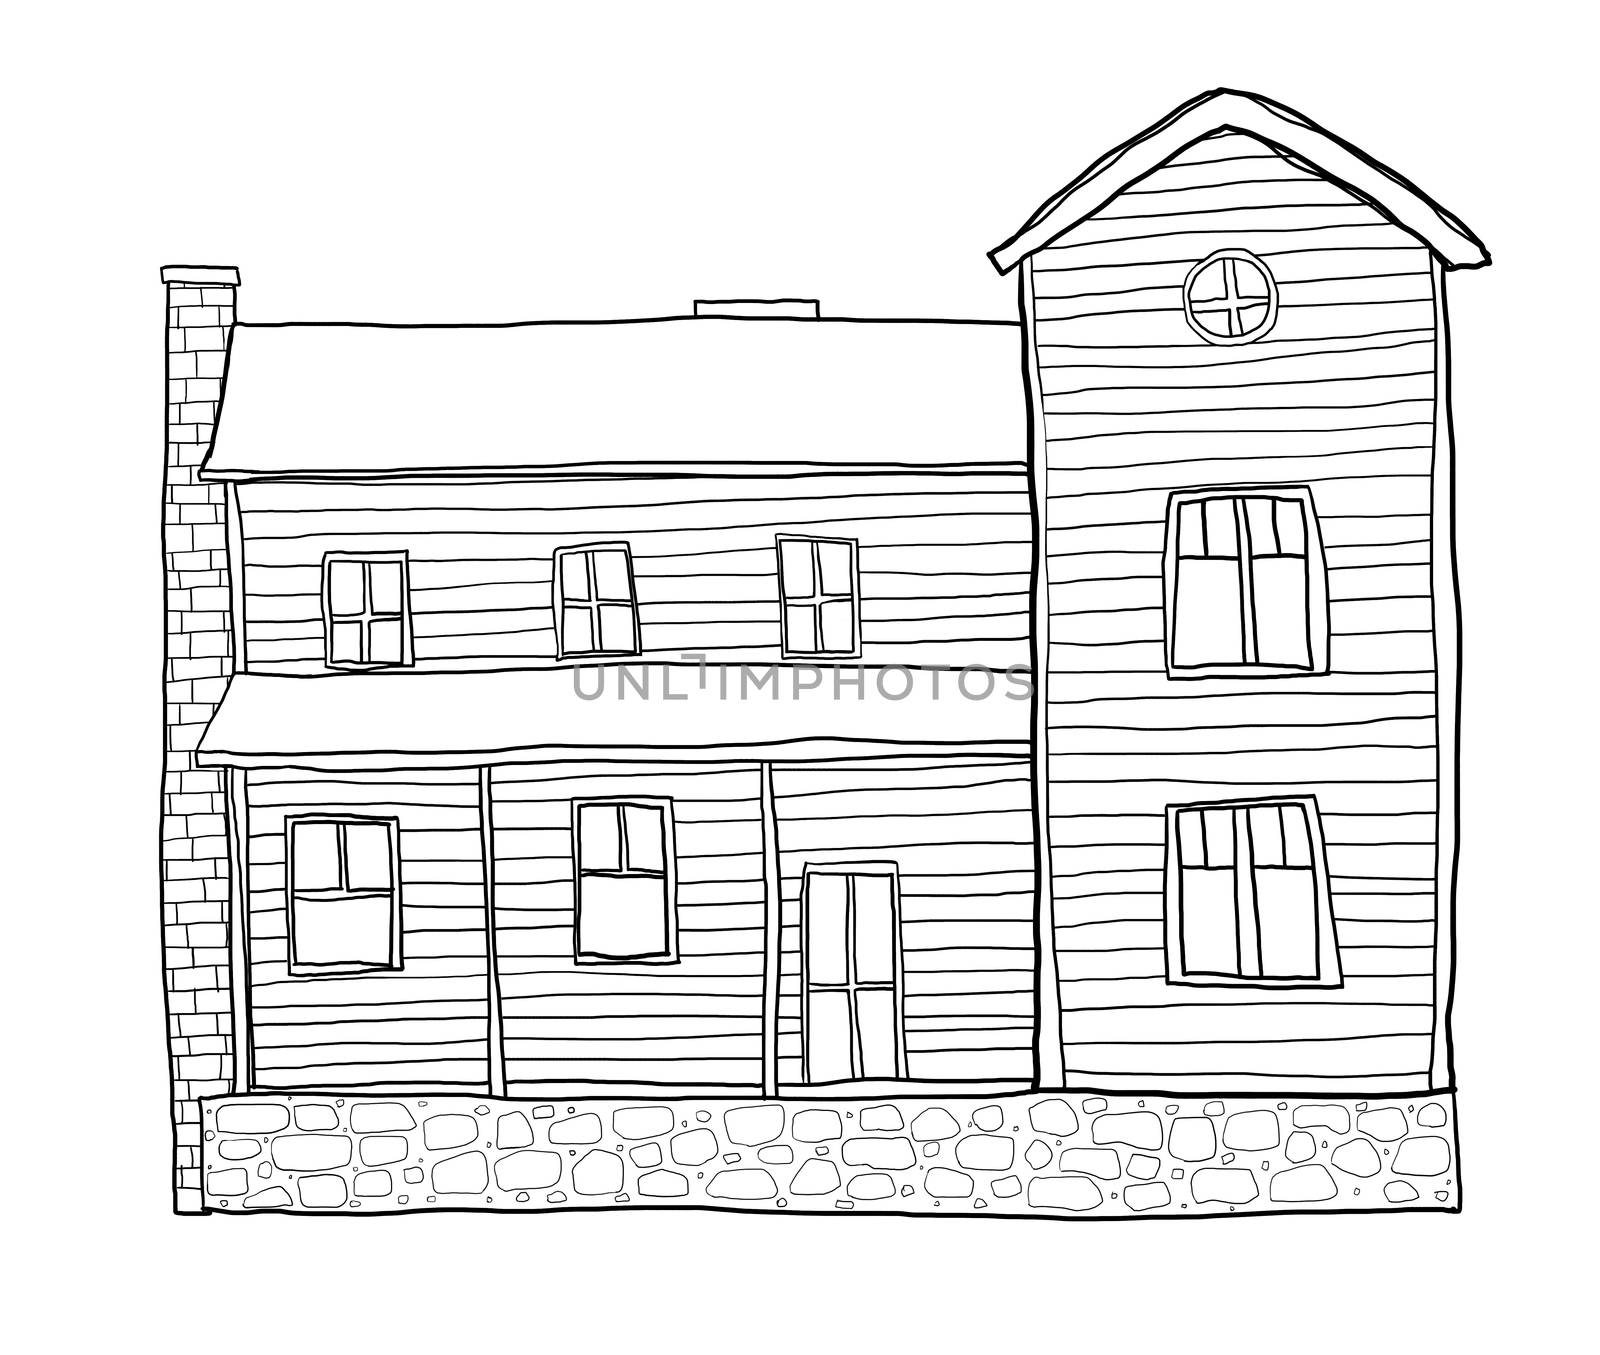 old house style cute line art illustration by paidaen